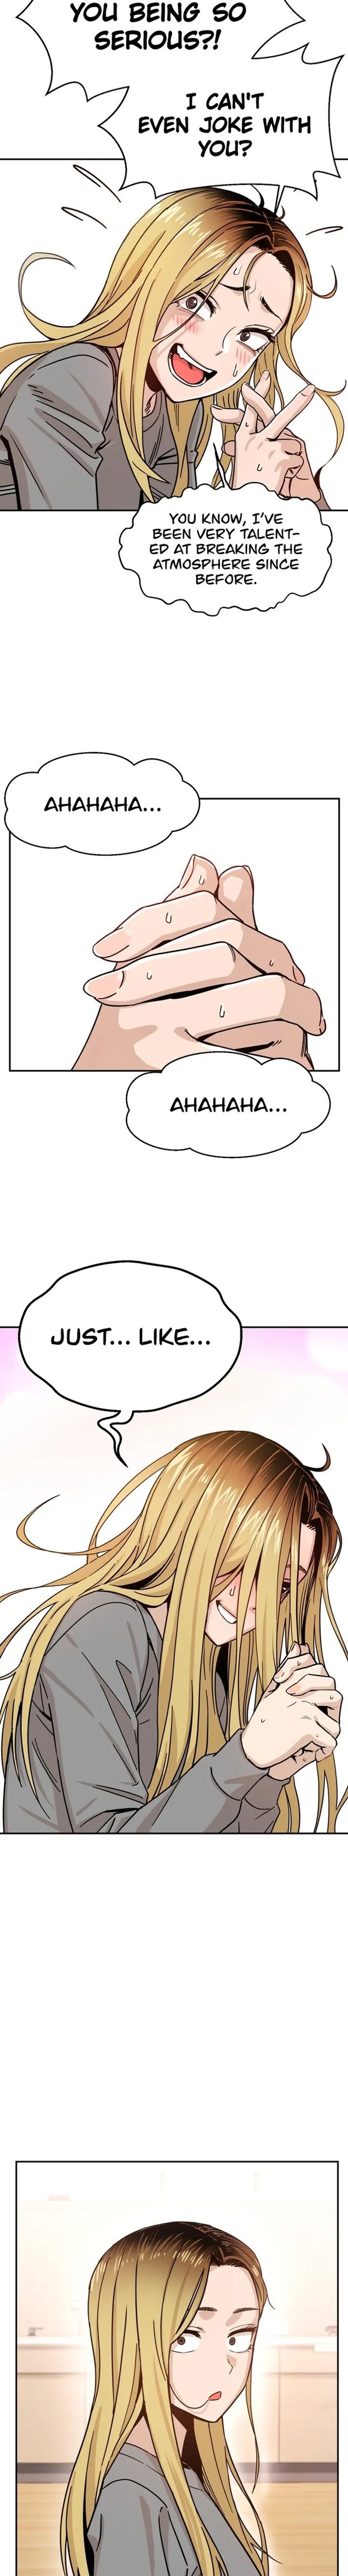 Match Made In Heaven By Chance Chapter 1 Page 29